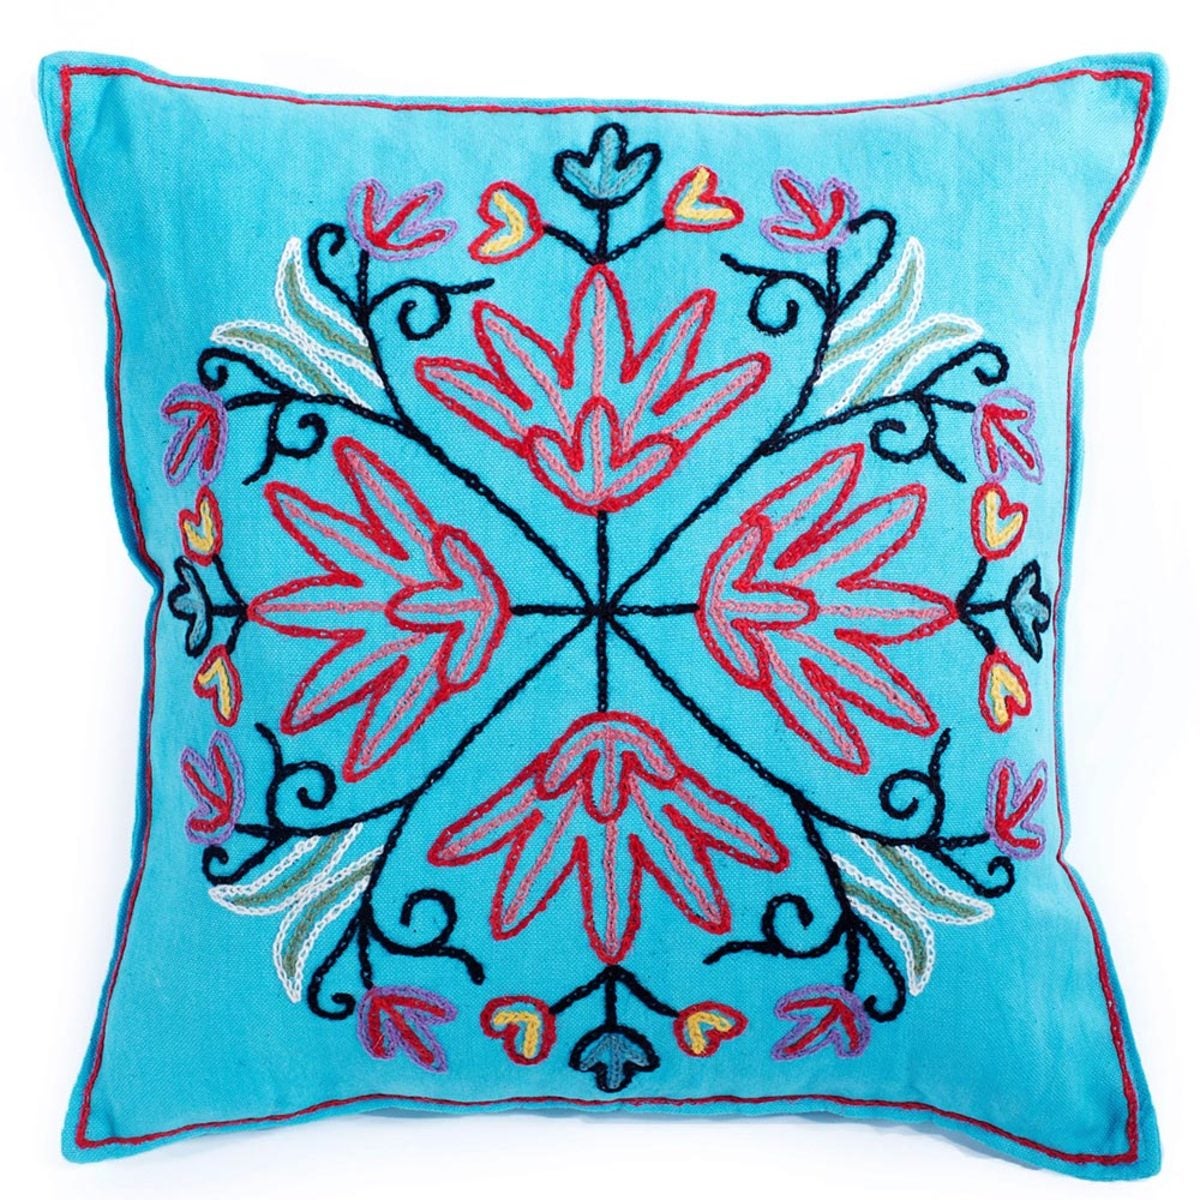 Embroidered Kashmir Pillow Cover, 18" sq. - Turquoise